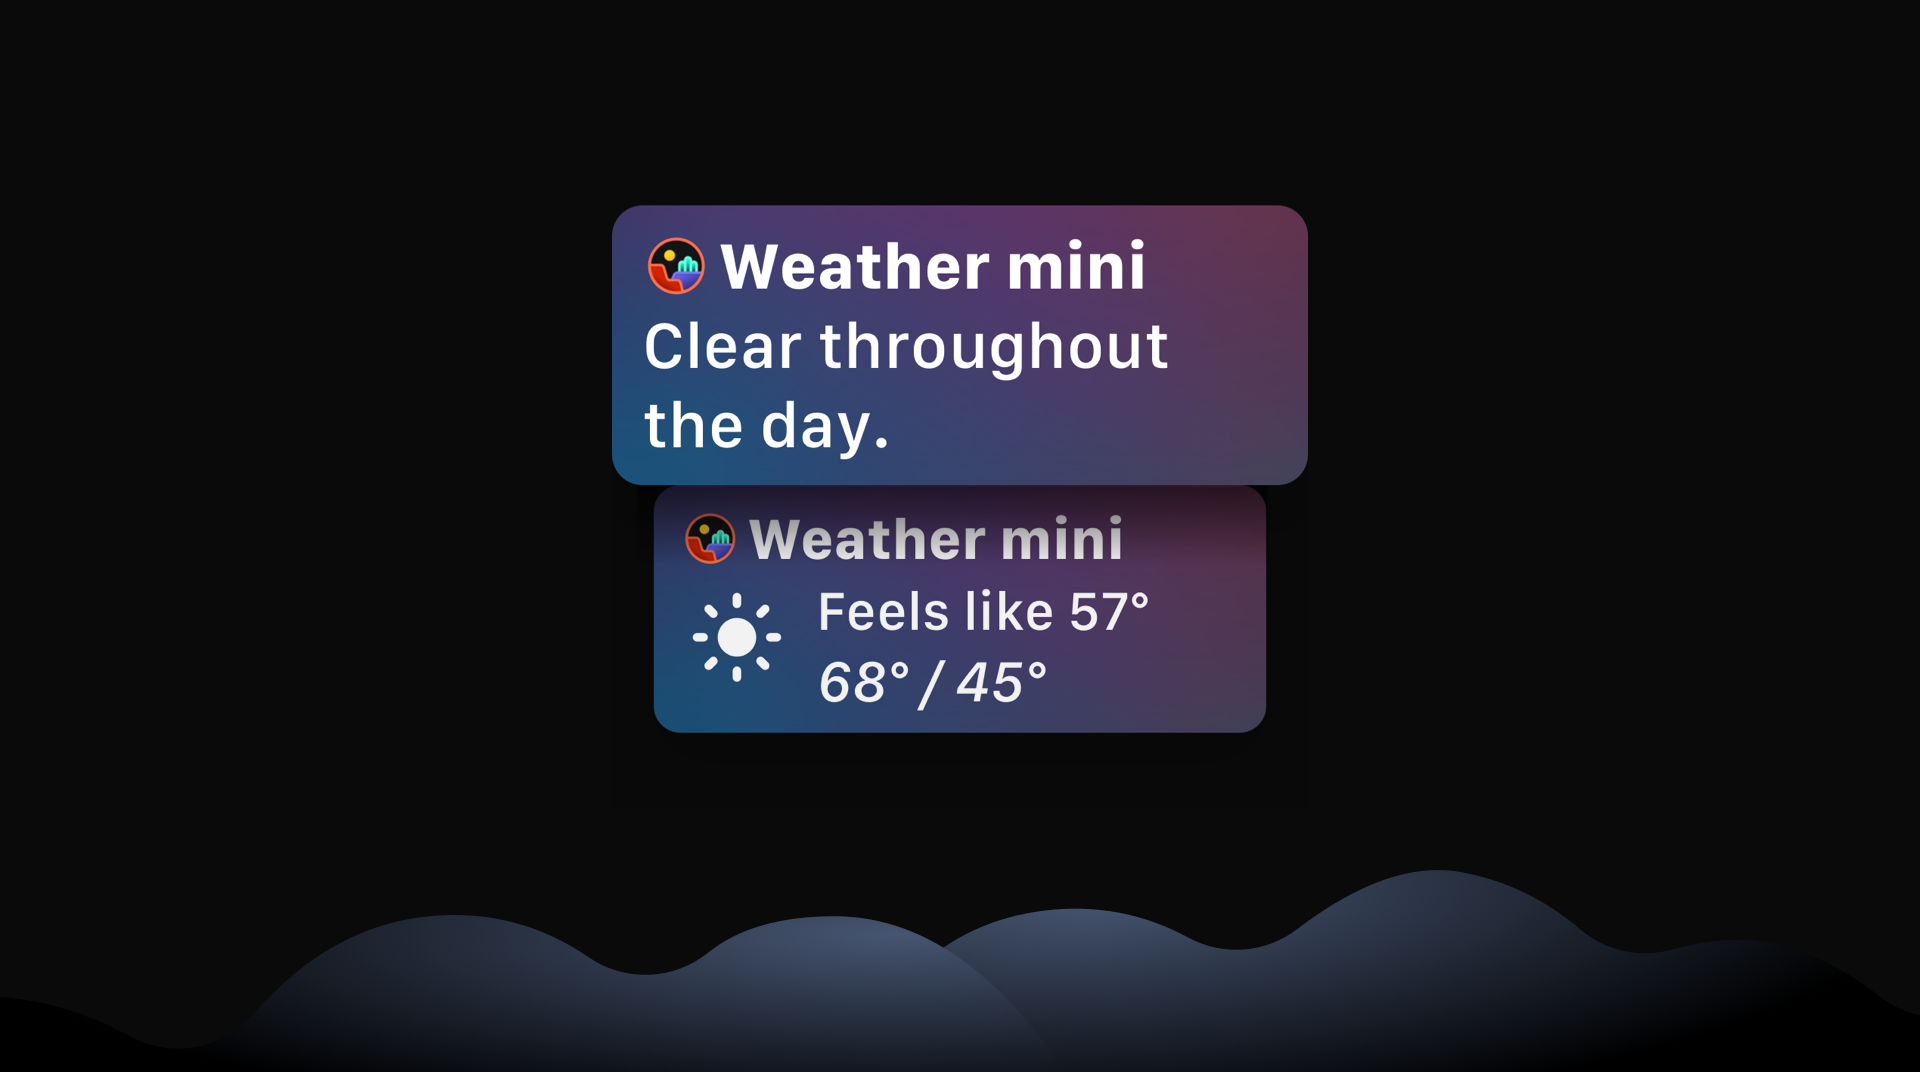 What's new in Weather mini 1.1